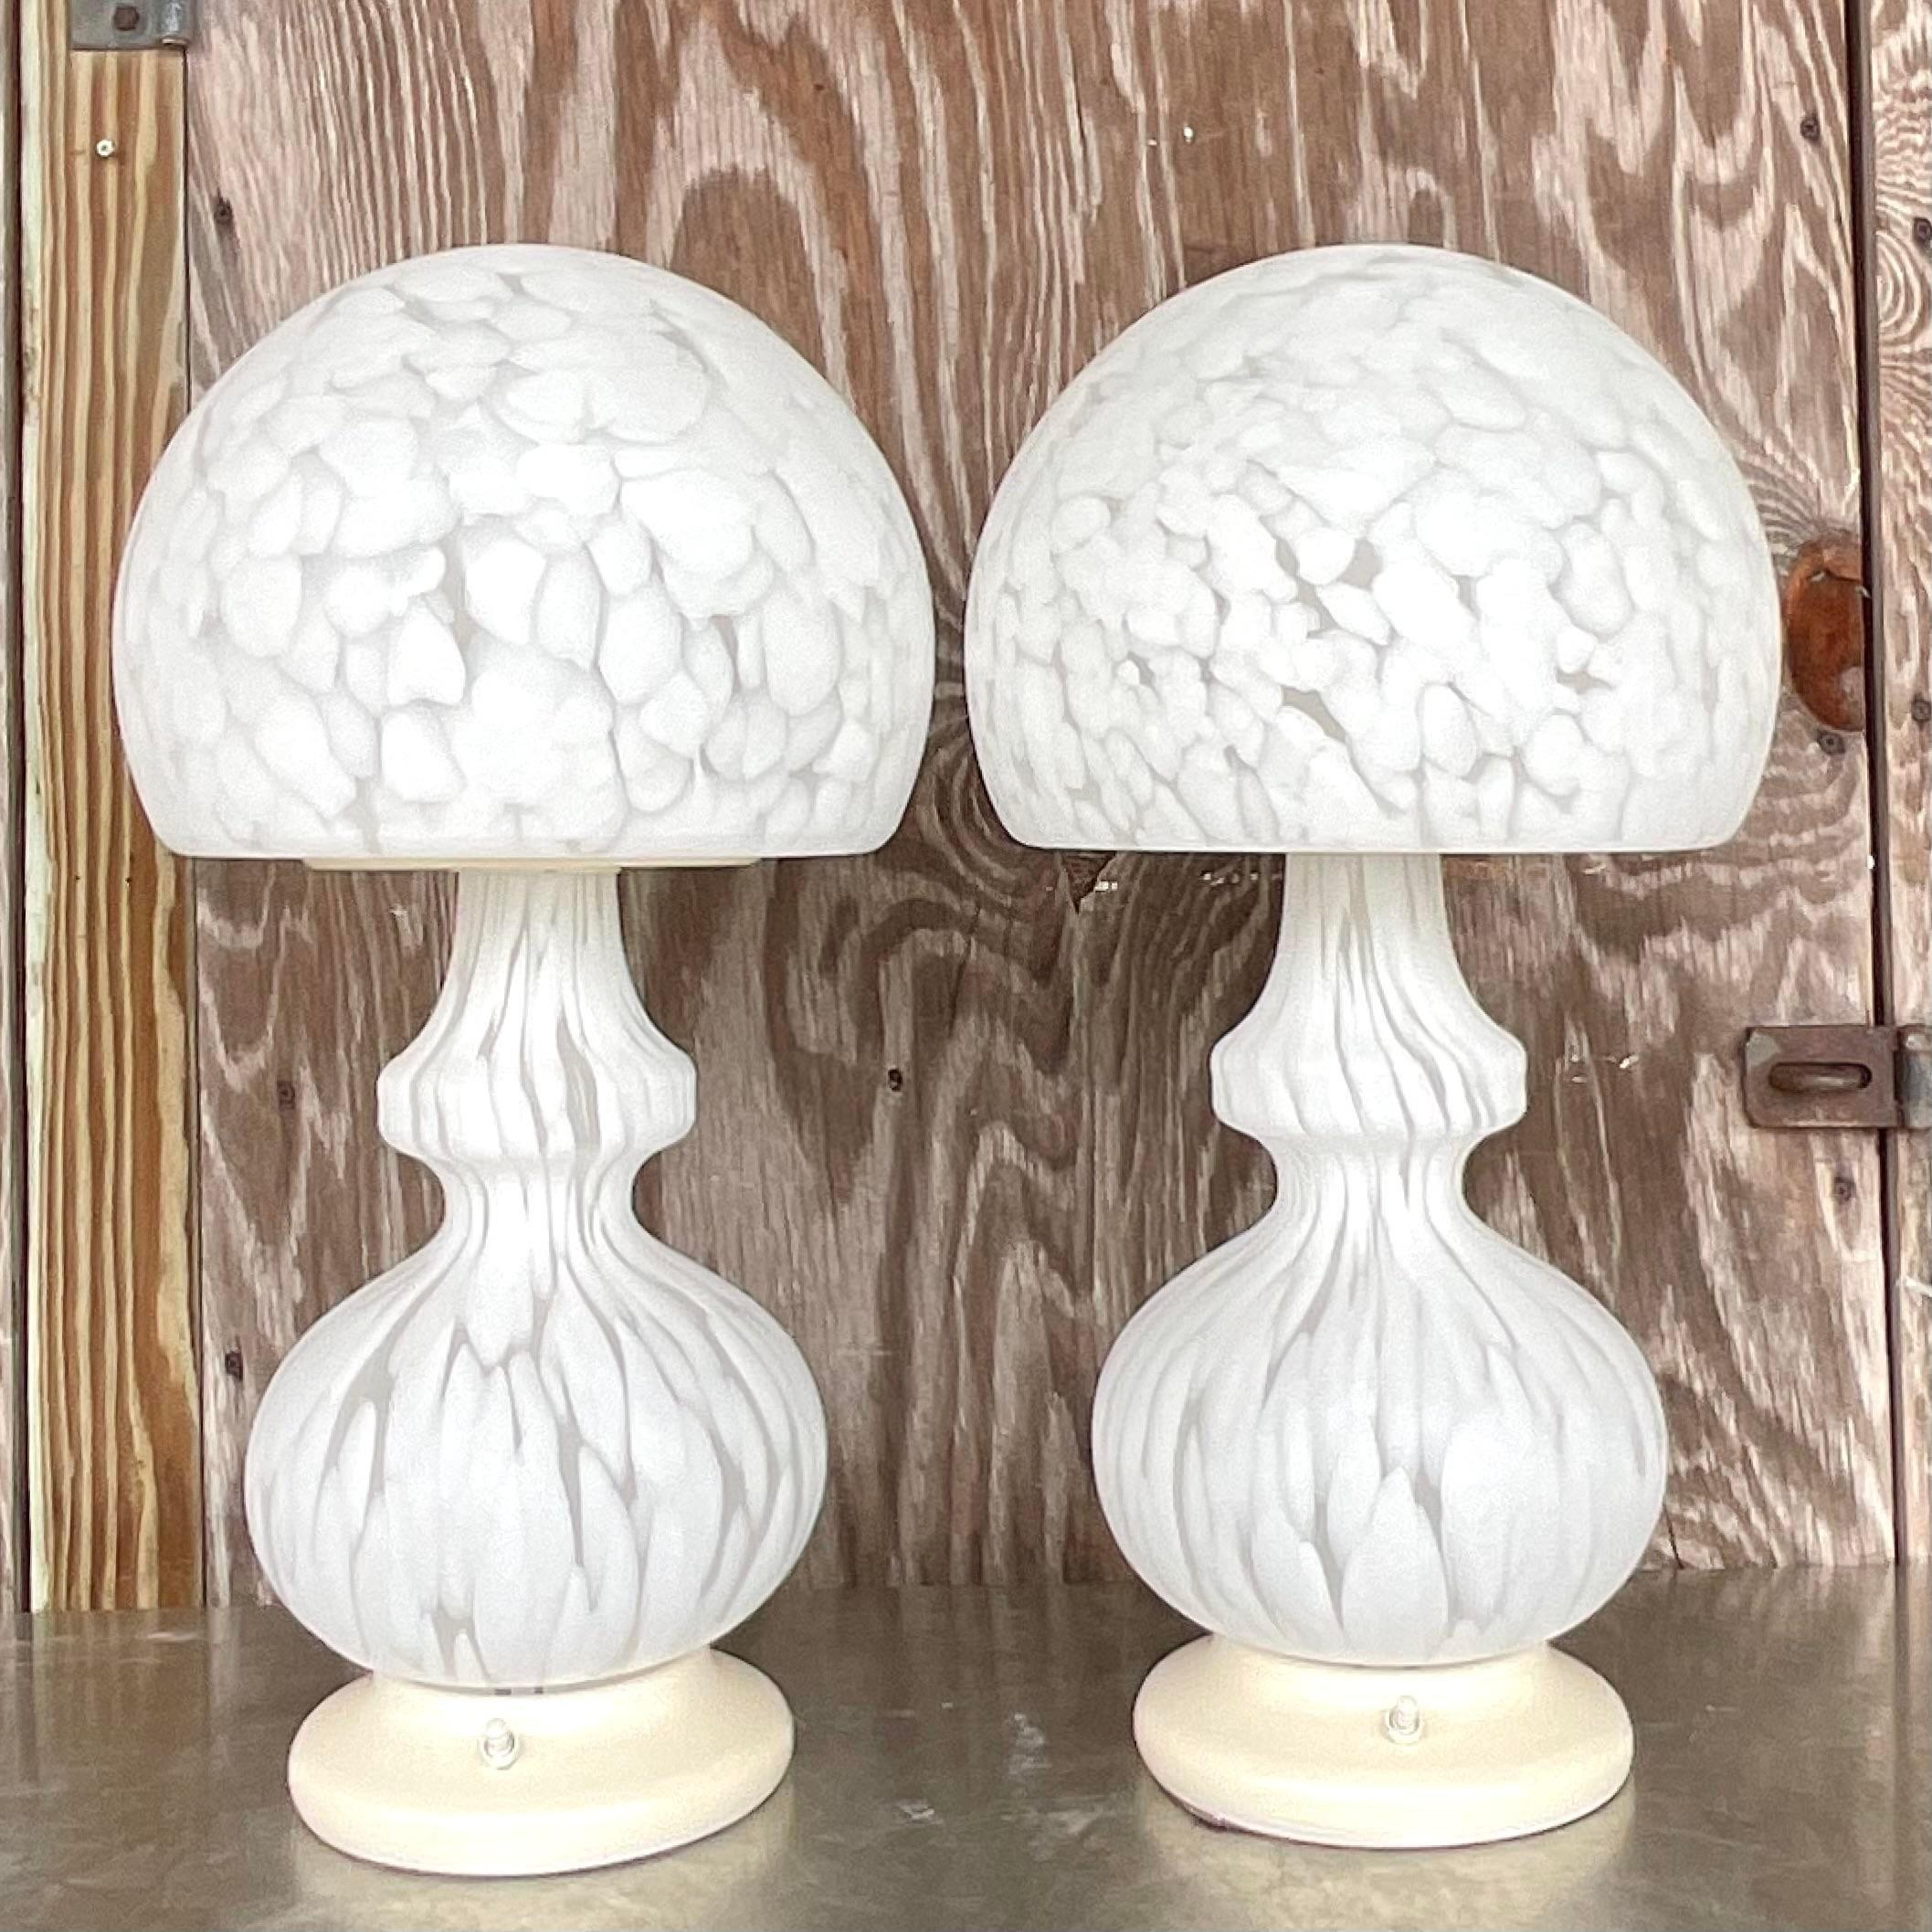 Vintage Globe Lamps After Murano for Someroso for Laurel Lighting - a Pair In Good Condition For Sale In west palm beach, FL